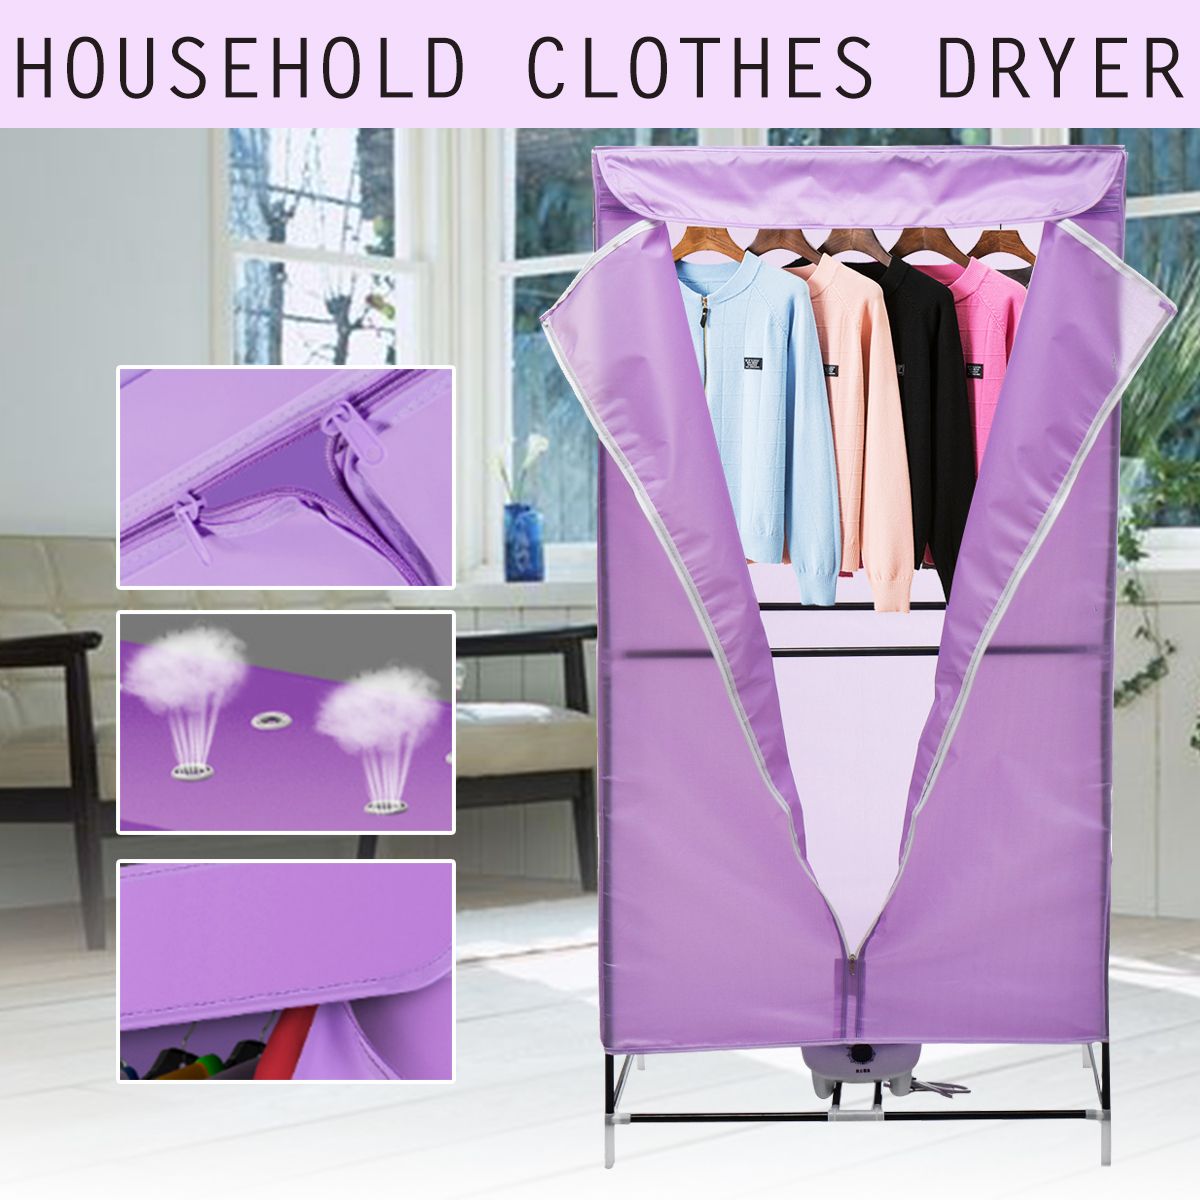 1000W-220V-Electric-Cloth-Dryer-Household-Portable-Baby-Clothes-Shoes-Boots-Cover-Power-Motor-Drying-1562622